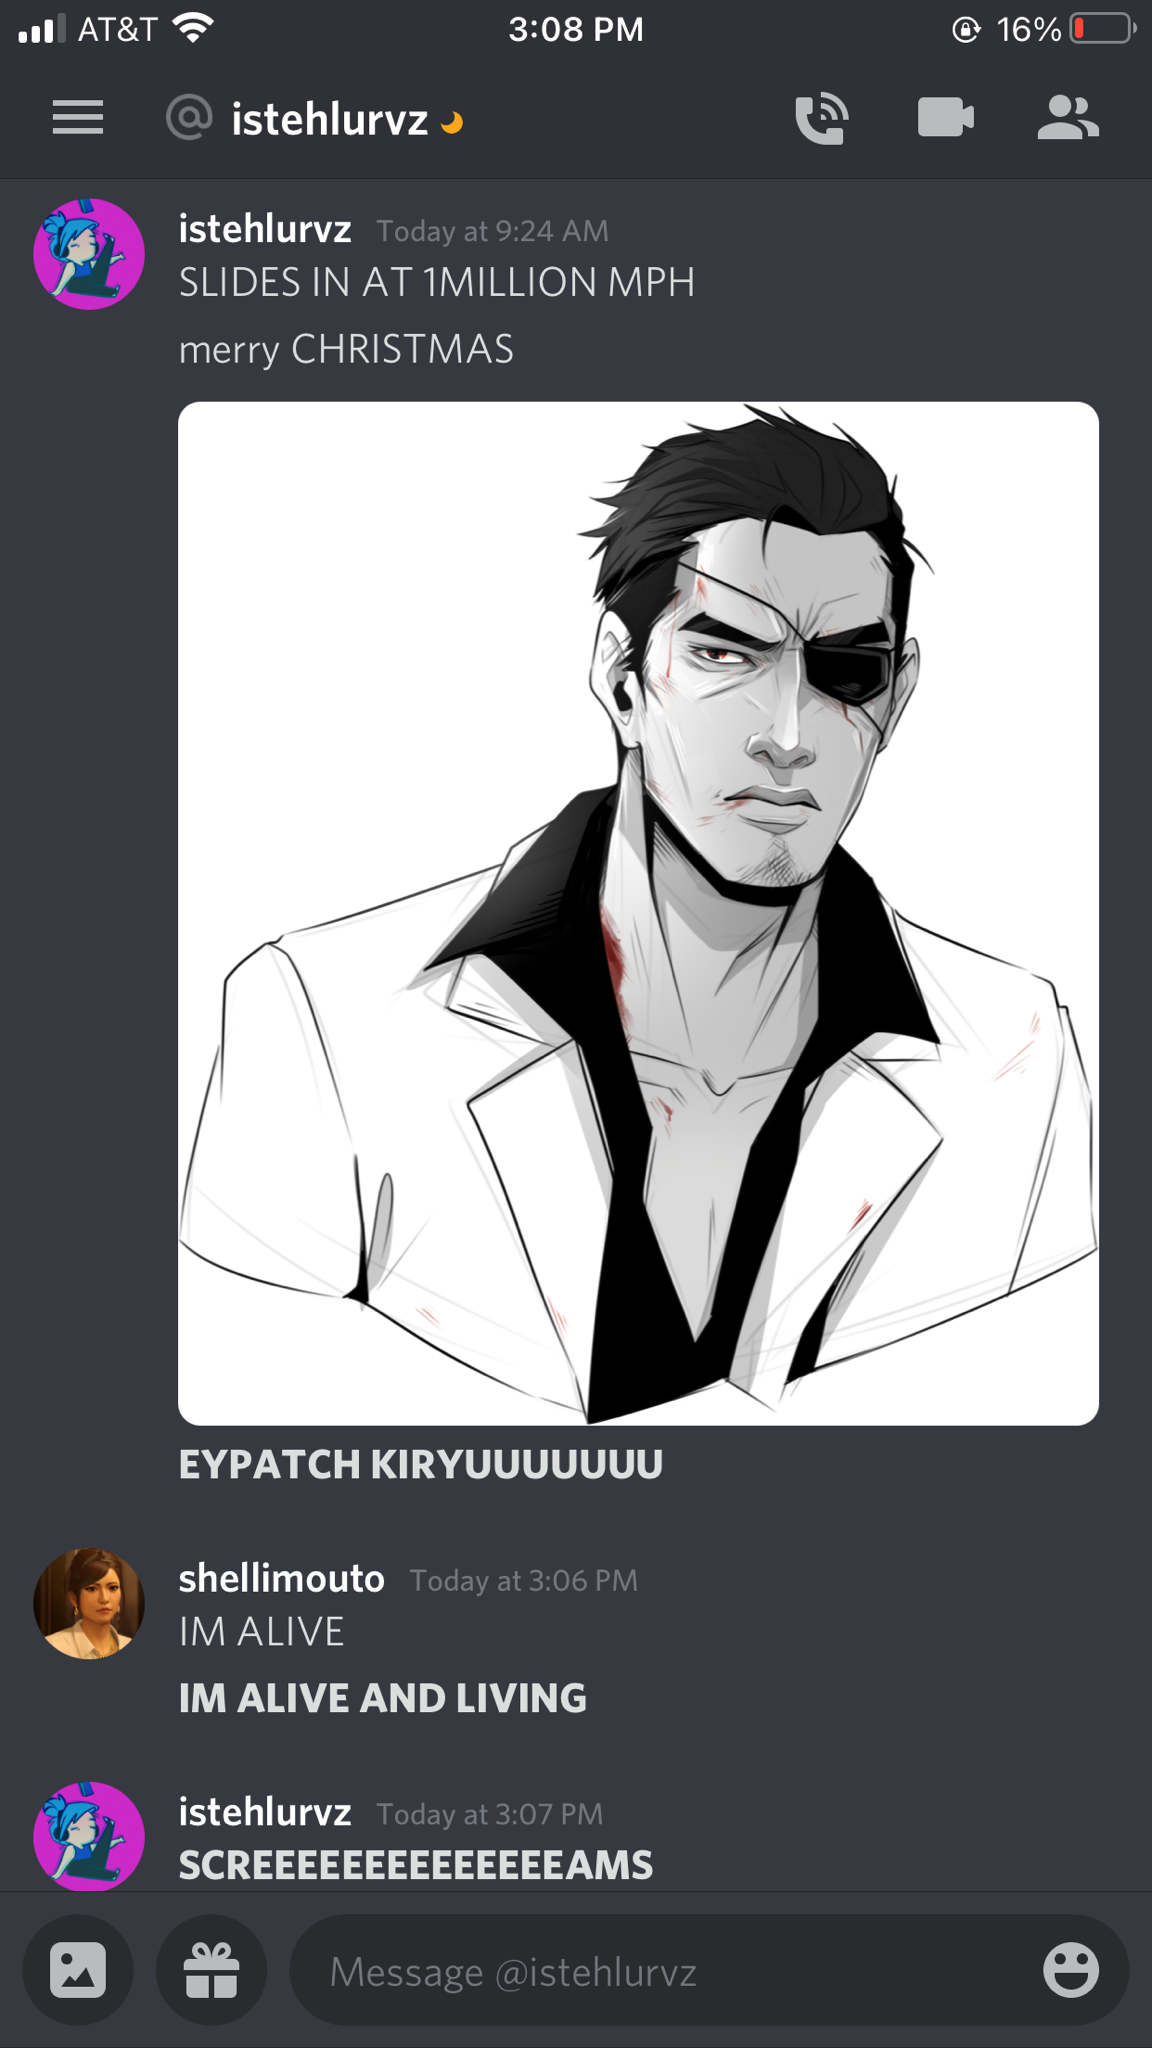 saltandbees:WOKE UP TO THE GREATEST CHRISTMAS GIFT POSSIBLE FROM MY BFF @istehlurvz !!!!!She drew Kiryu from my fic and him lookin so fine 😭💕 so go follow Sam and go read my fic and be destroyed with emotions by this fucking amazing art akpfpfpfpfffpo